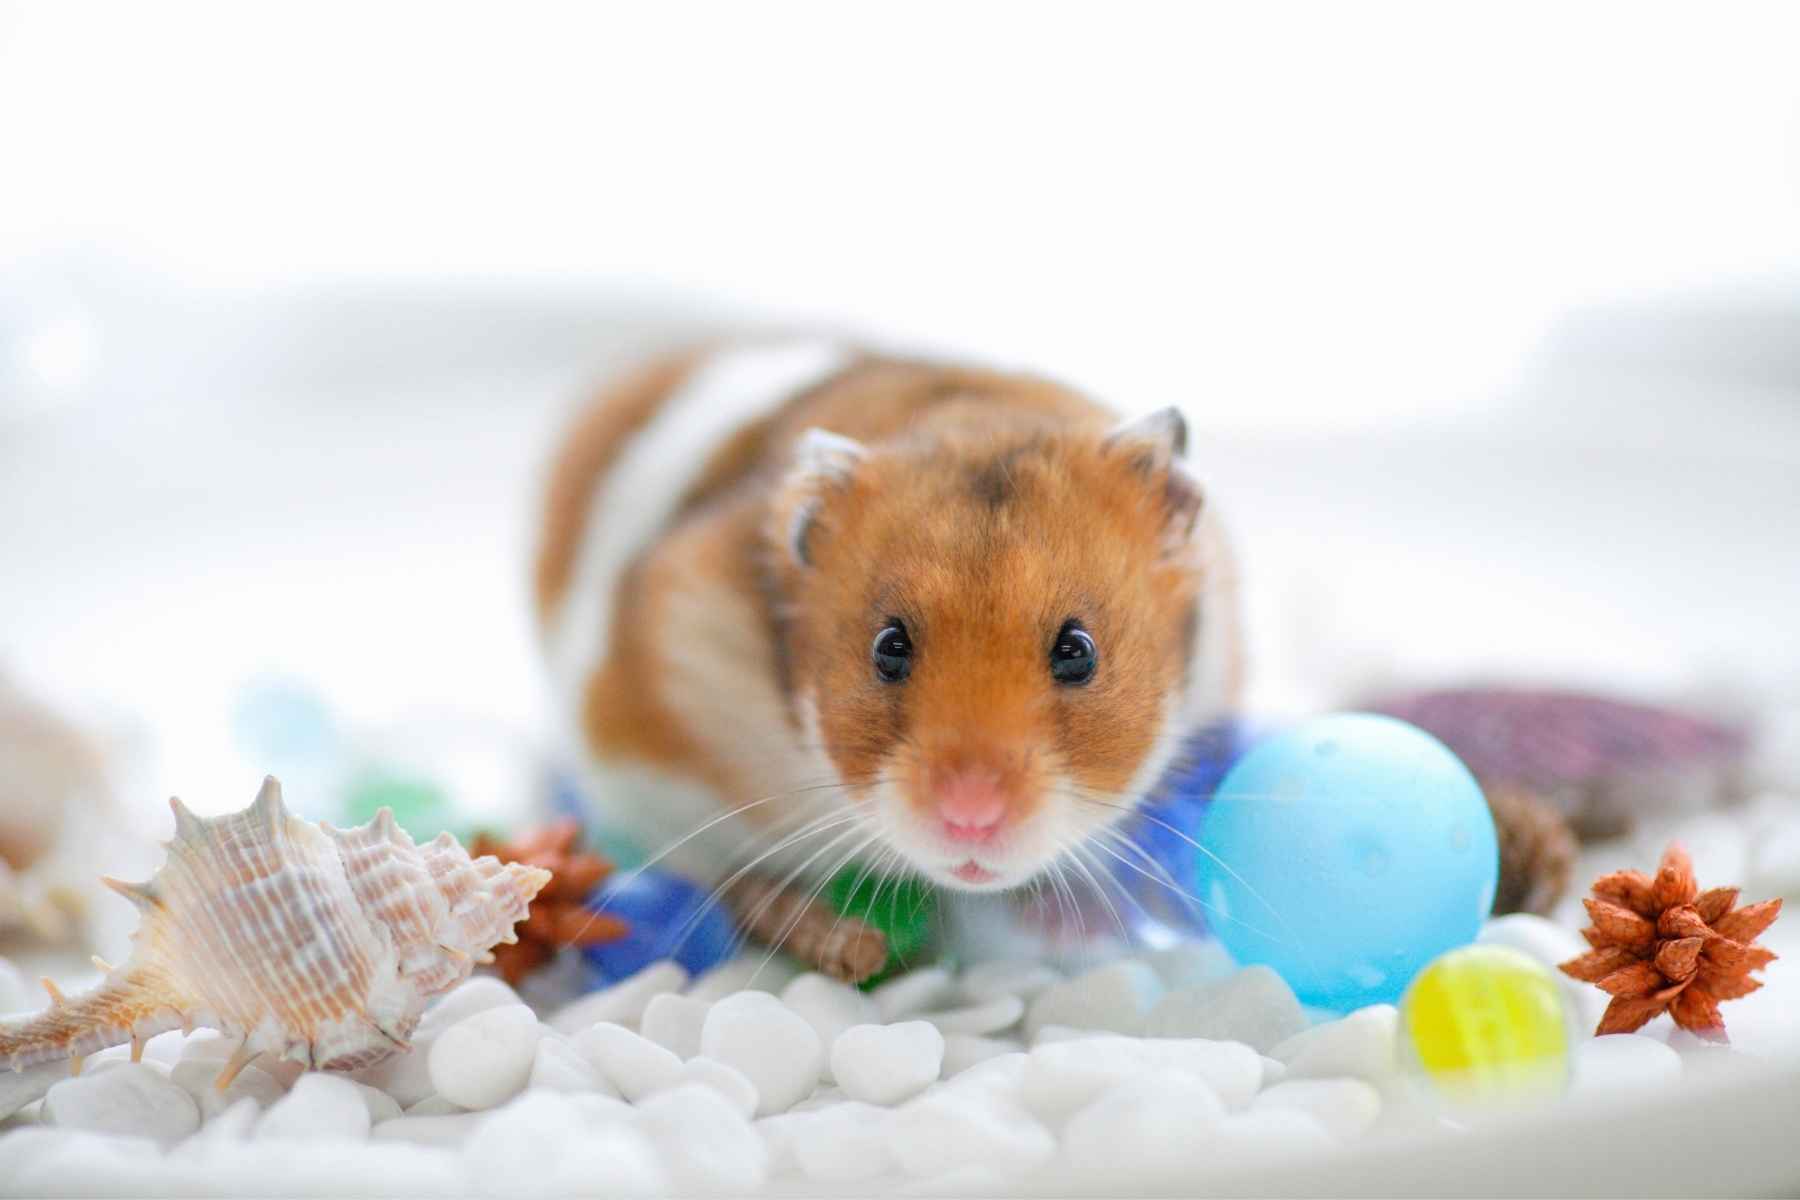 A hamster and many colorful things